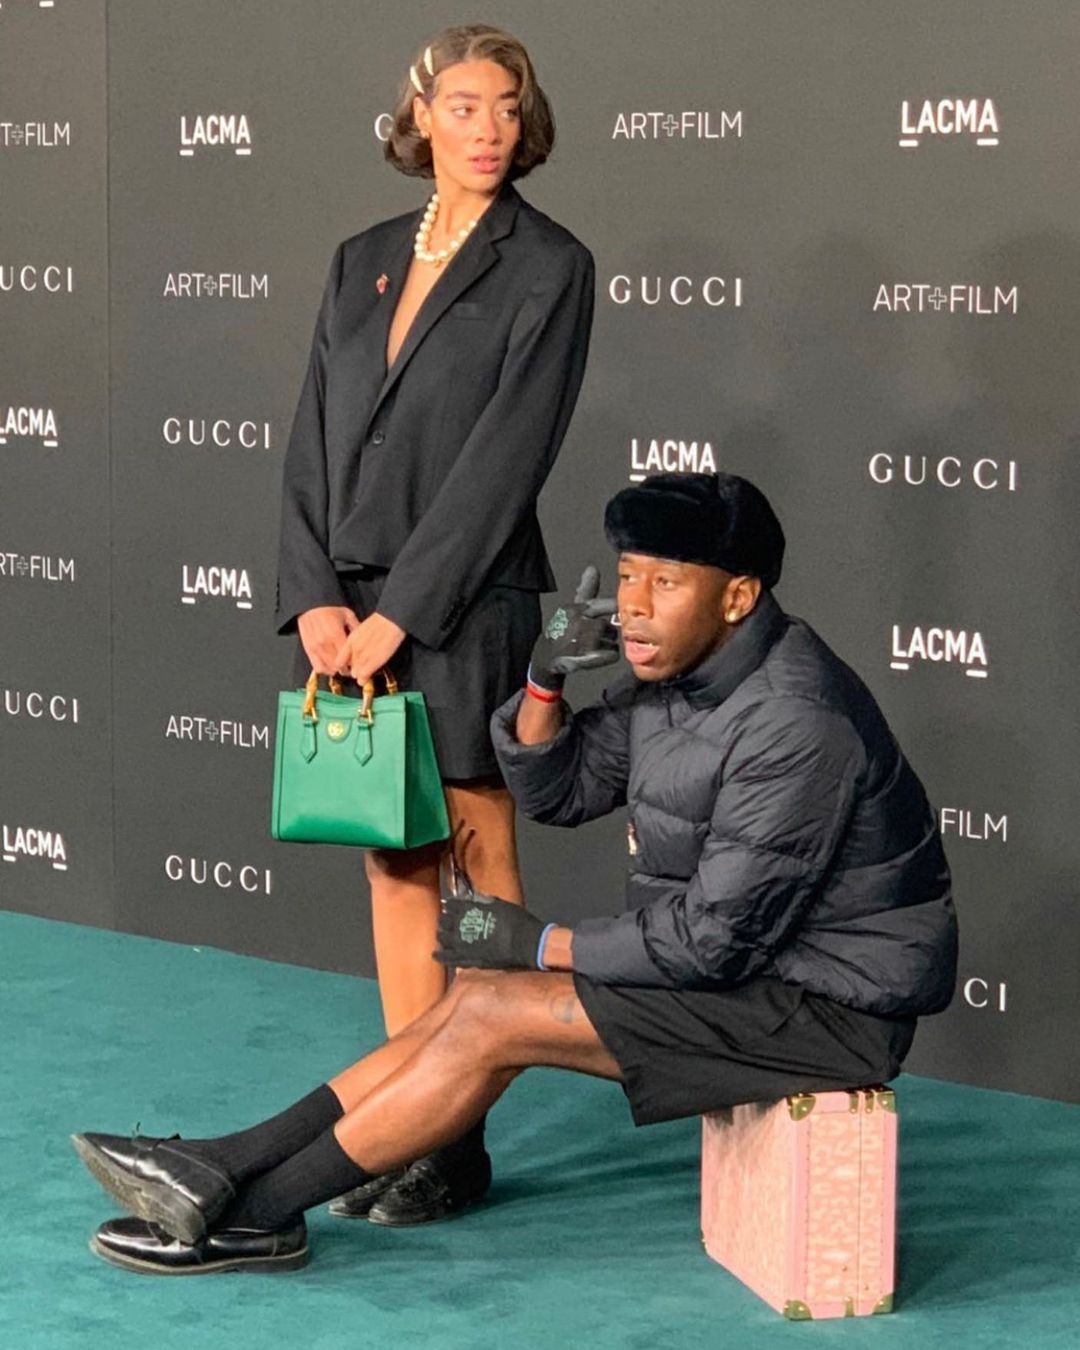 SPOTTED: Tyler, The Creator Attends the LACMA Art + Film Gala with Reign Judge